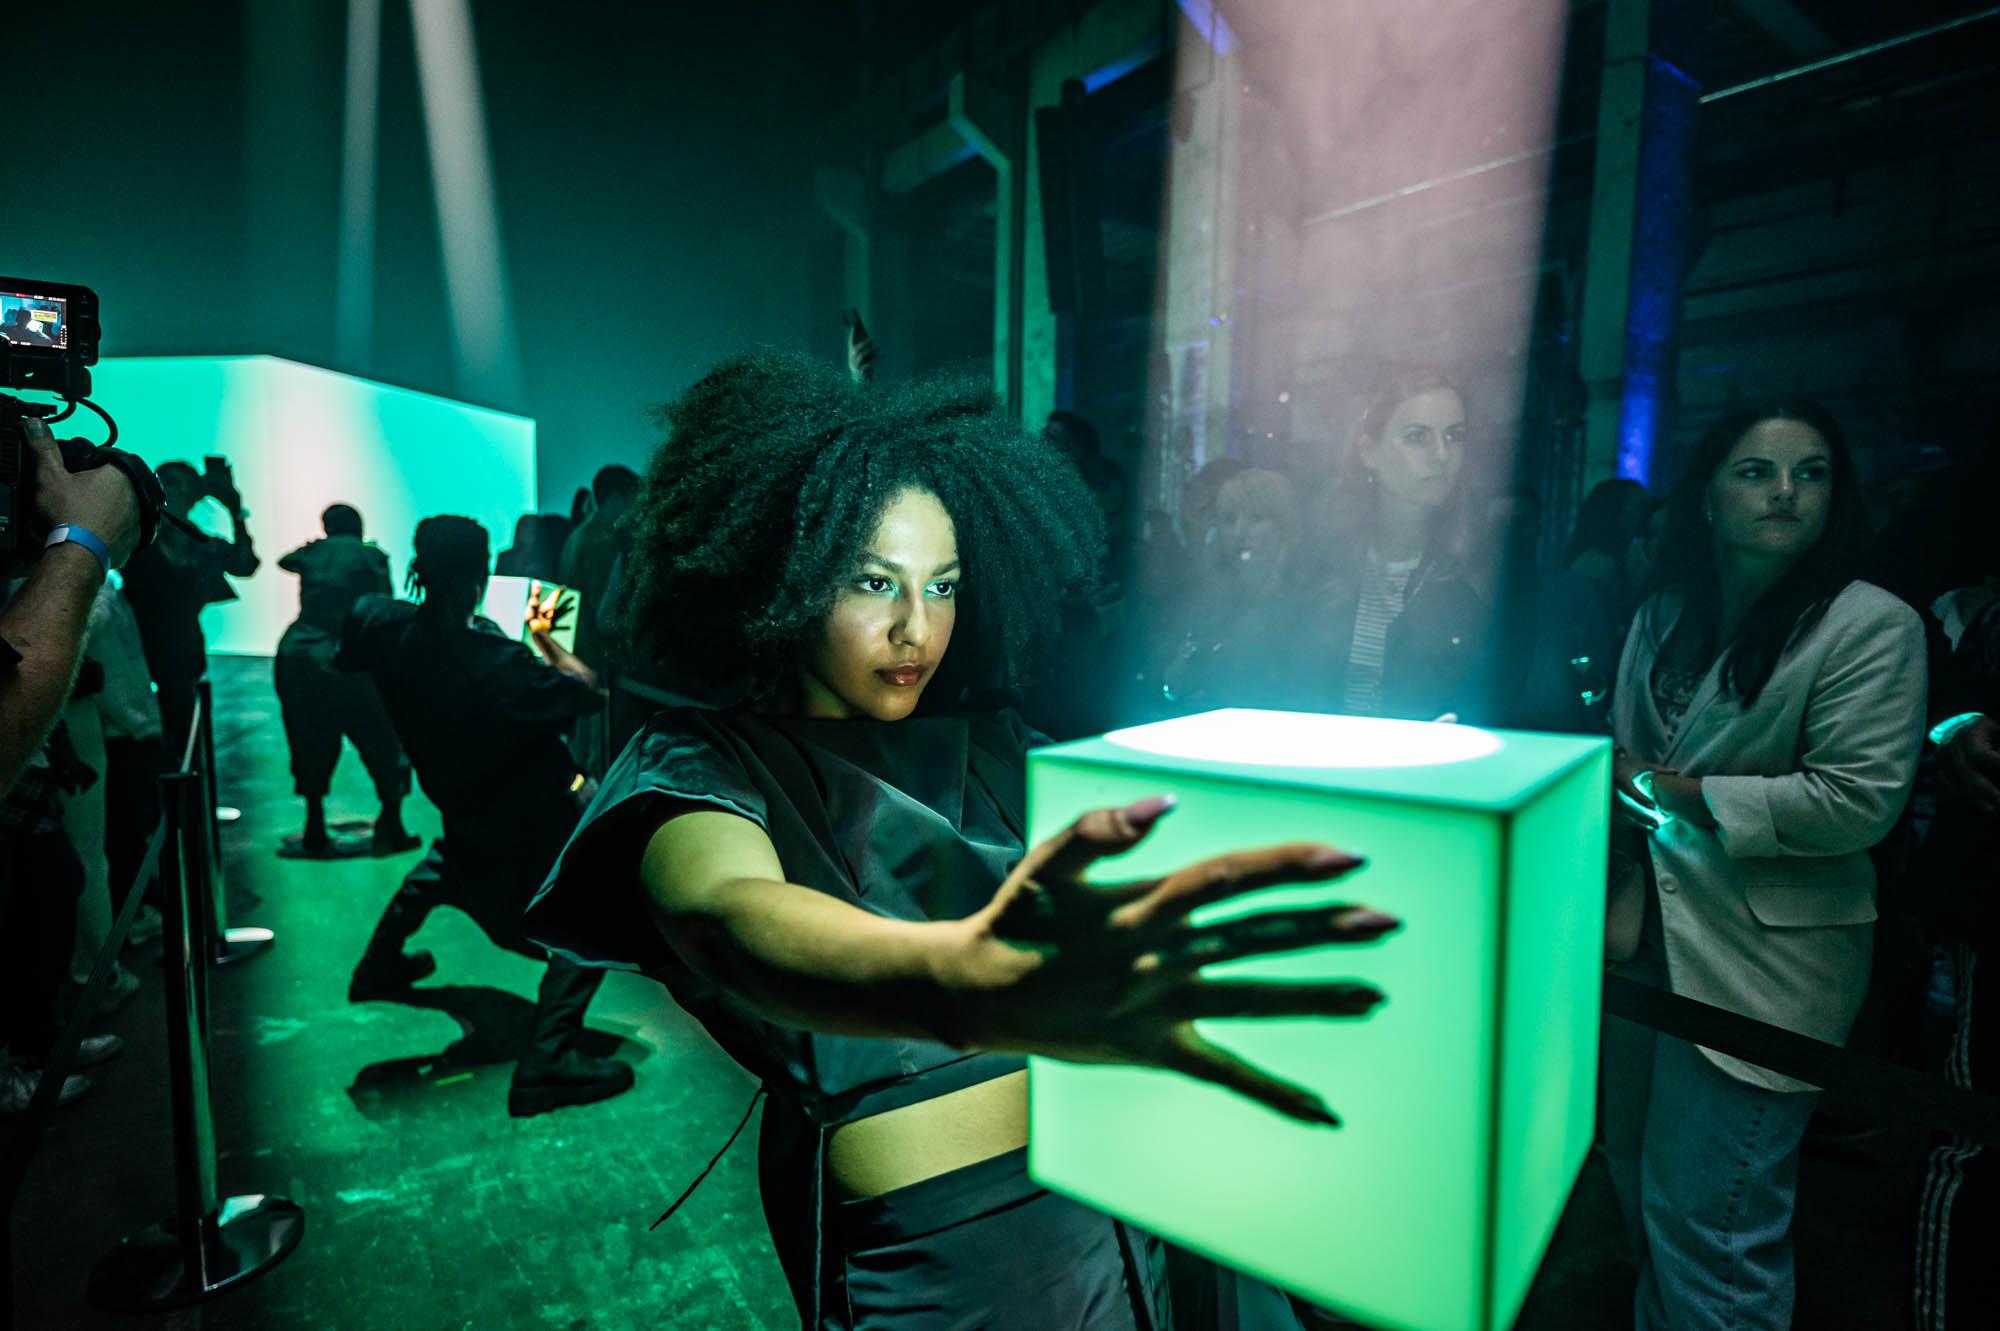 Shots of singular performers holding a cube of light with audiences surrounding them at the Battle Royal Studios event for a fortune 500 client at Berlin's Kraftwerkat the Battle Royal Studios event for a fortune 500 client at Berlin's Kraftwerk